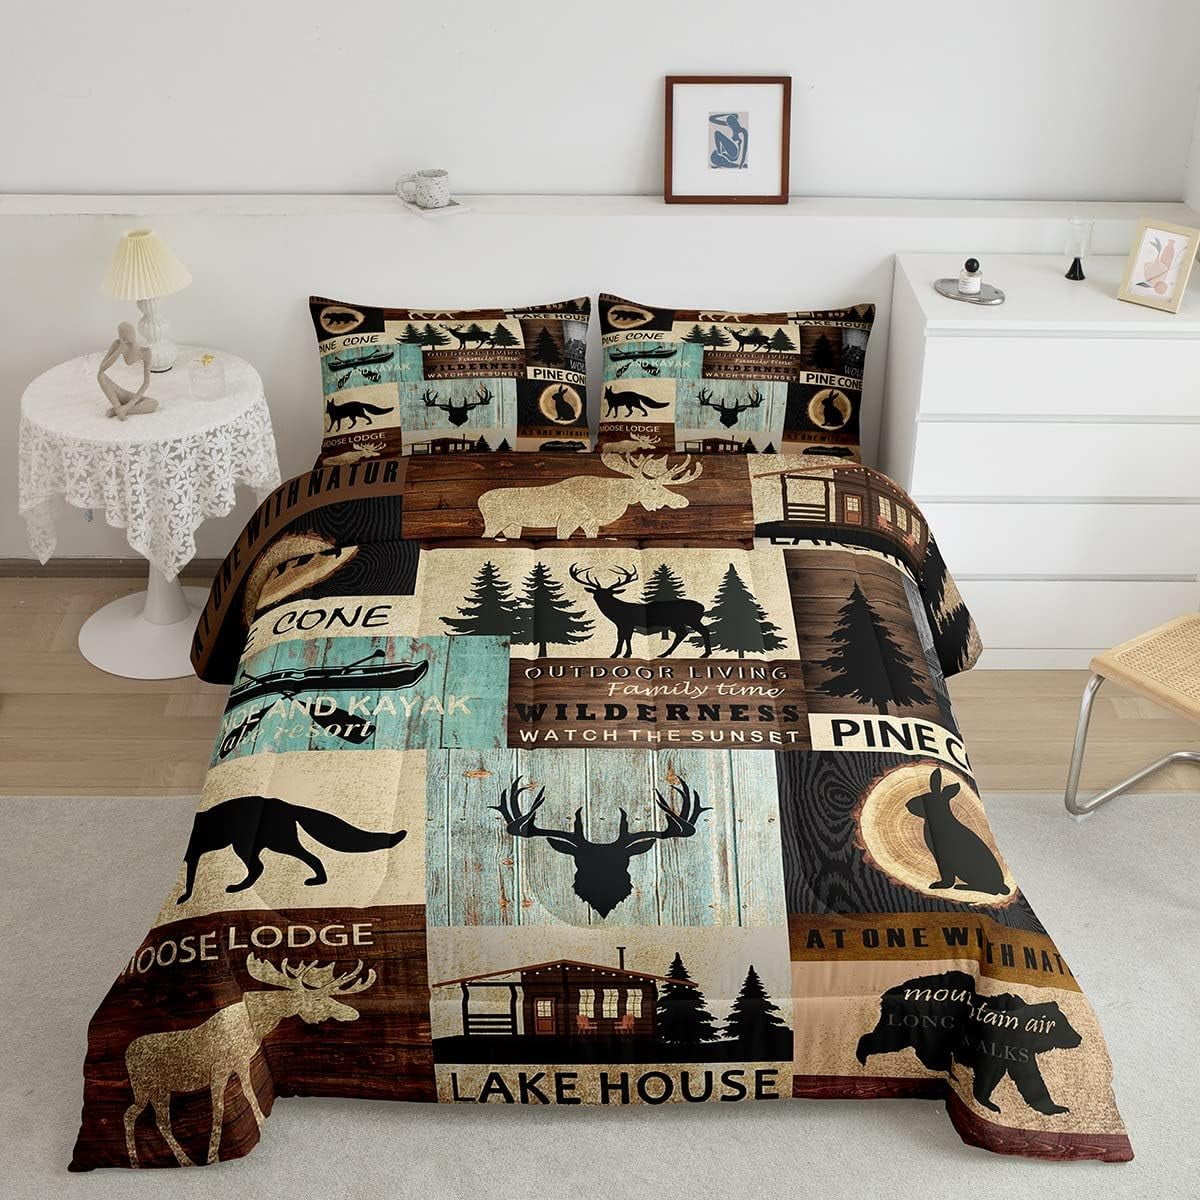 Hunting Woodland Animal Comforter Set Queen Rustic Fox Bear Deer Moose  Bedding Set,Lake House Fishing Comforter for Farmhouse Cabin  Lodge,Countryside Wildlife Quilt Duvet Brown Teal 2 Pillow Cases 